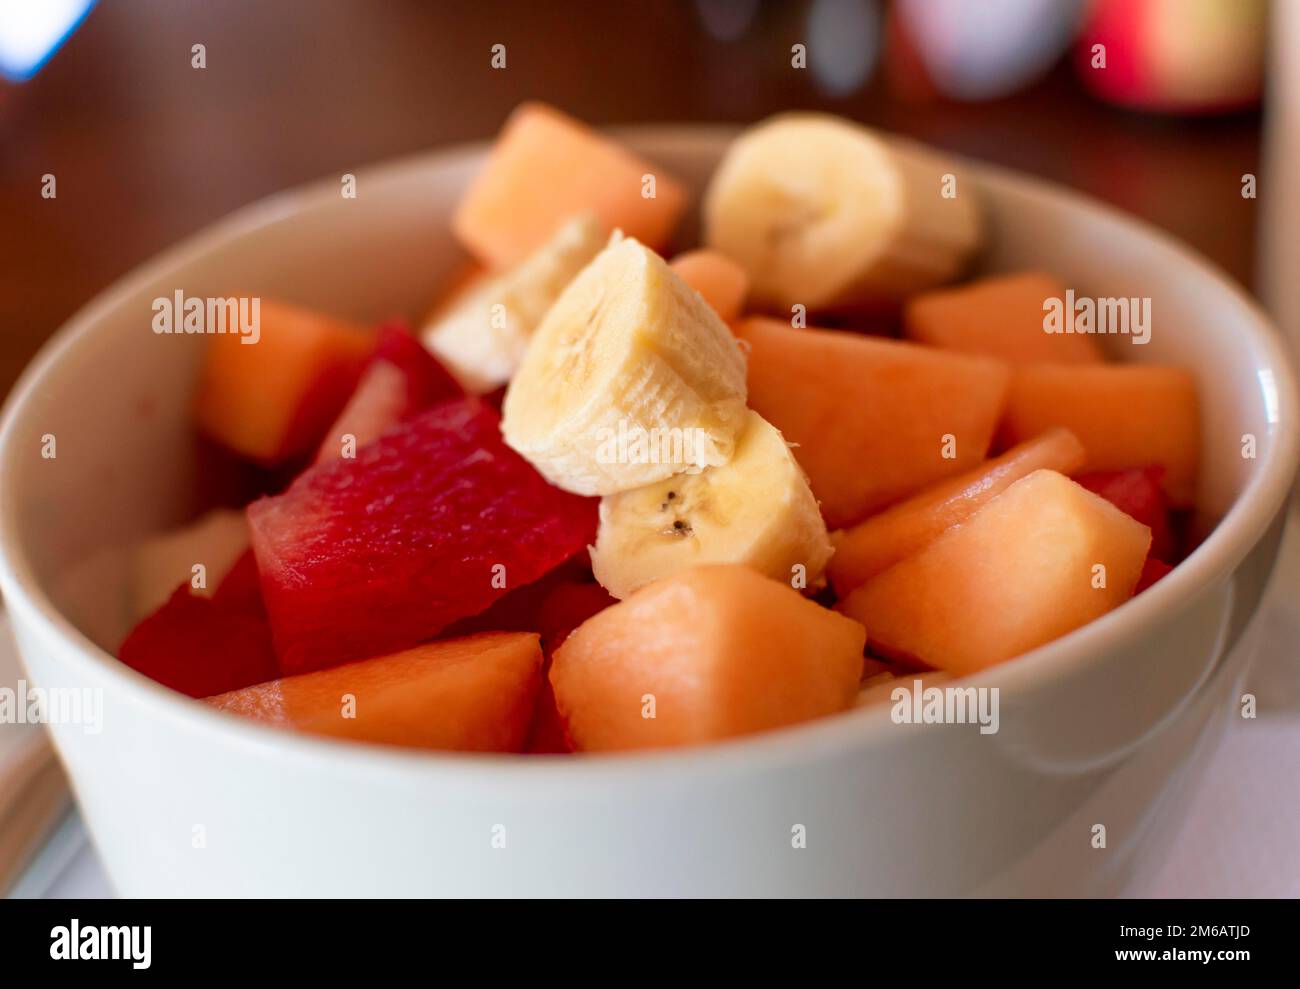 Close up of a cup of banana fruit salad with watermelon, Close up of fruit salad of banana, watermelon and melon Stock Photo